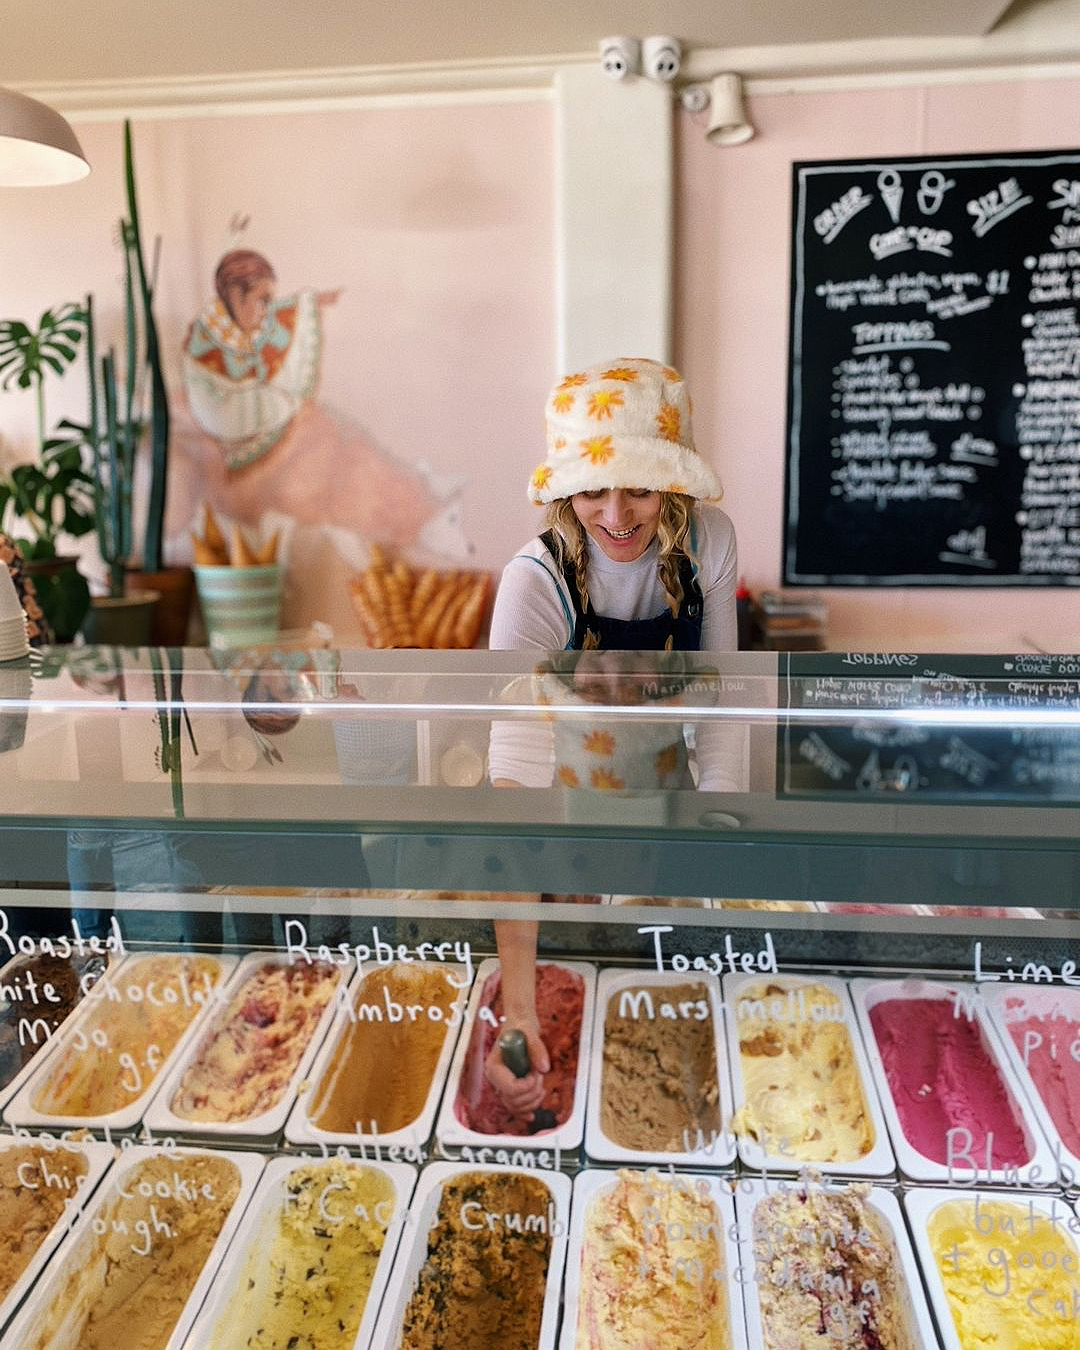 A girl in a sunny hat scoops at Duck Island Ice Cream.